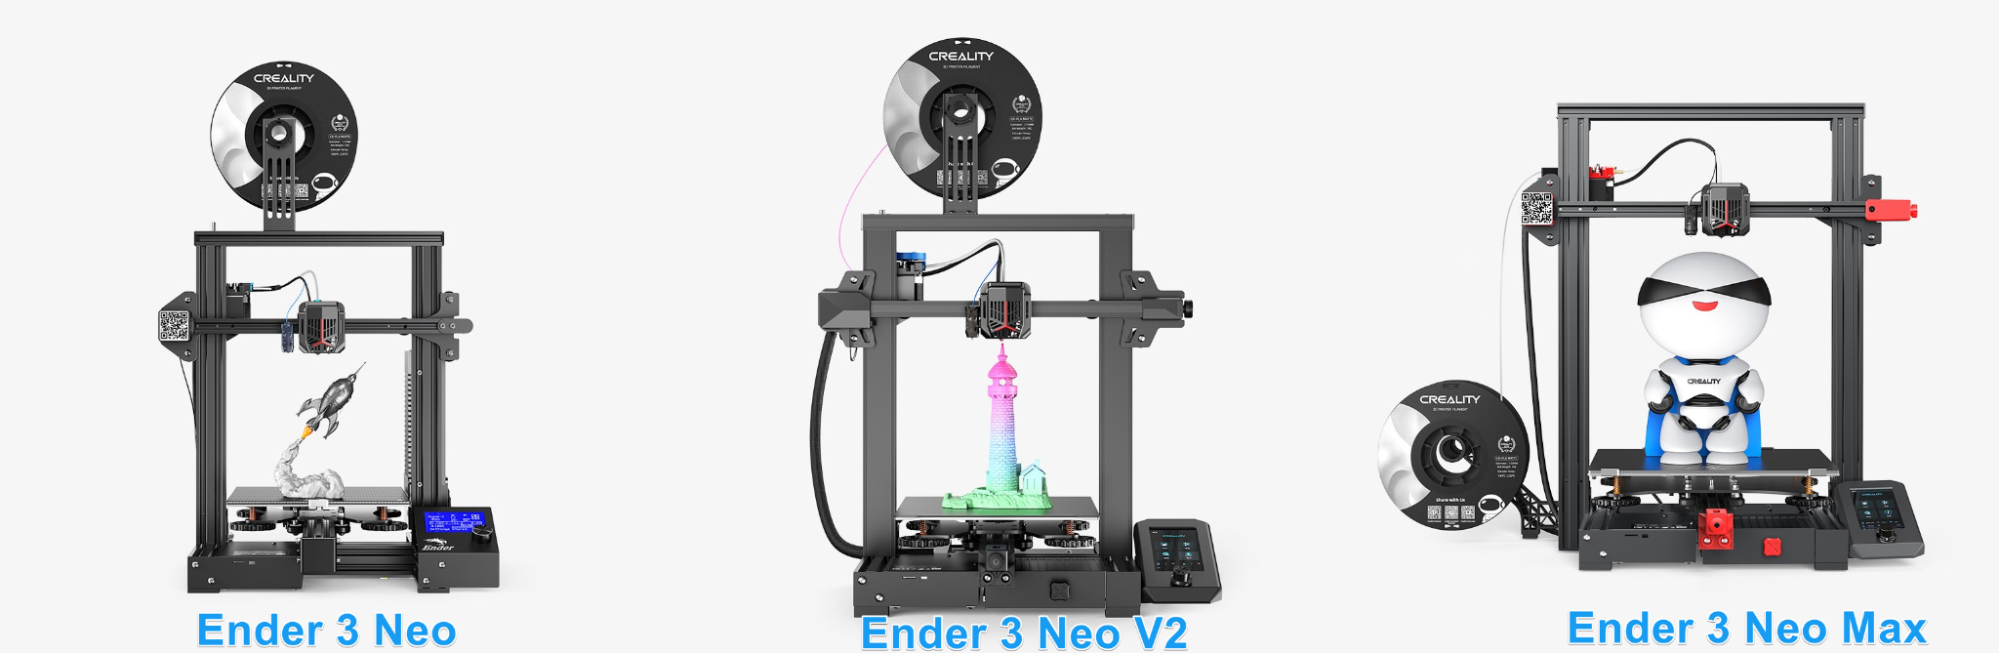 Ender 3 Neo and Ender 3 V2 Neo: the improvement of the Ender3